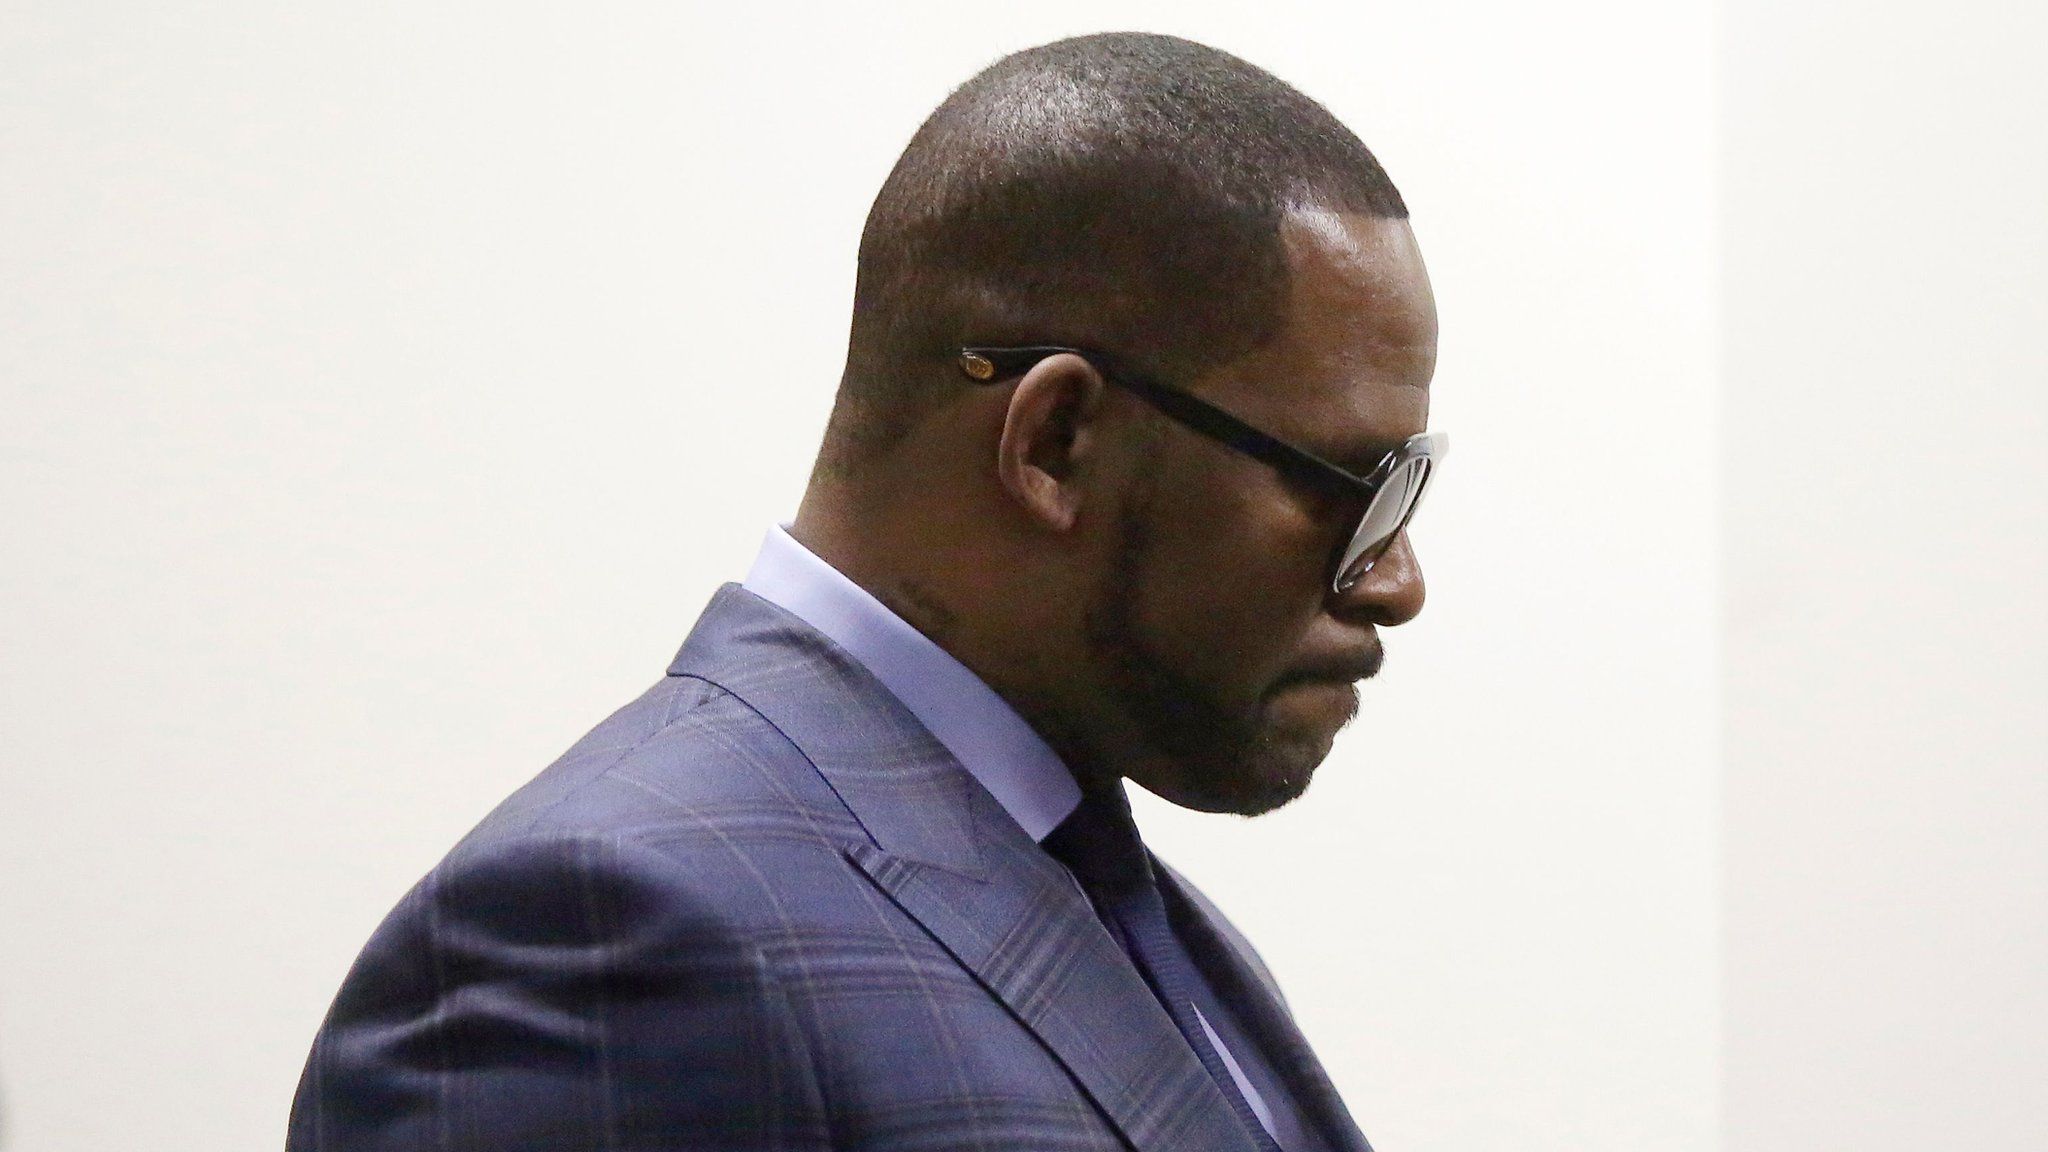 R. Kelly arrives at the Circuit Court of Cook County, Domestic Relations Division on March 6, 2019